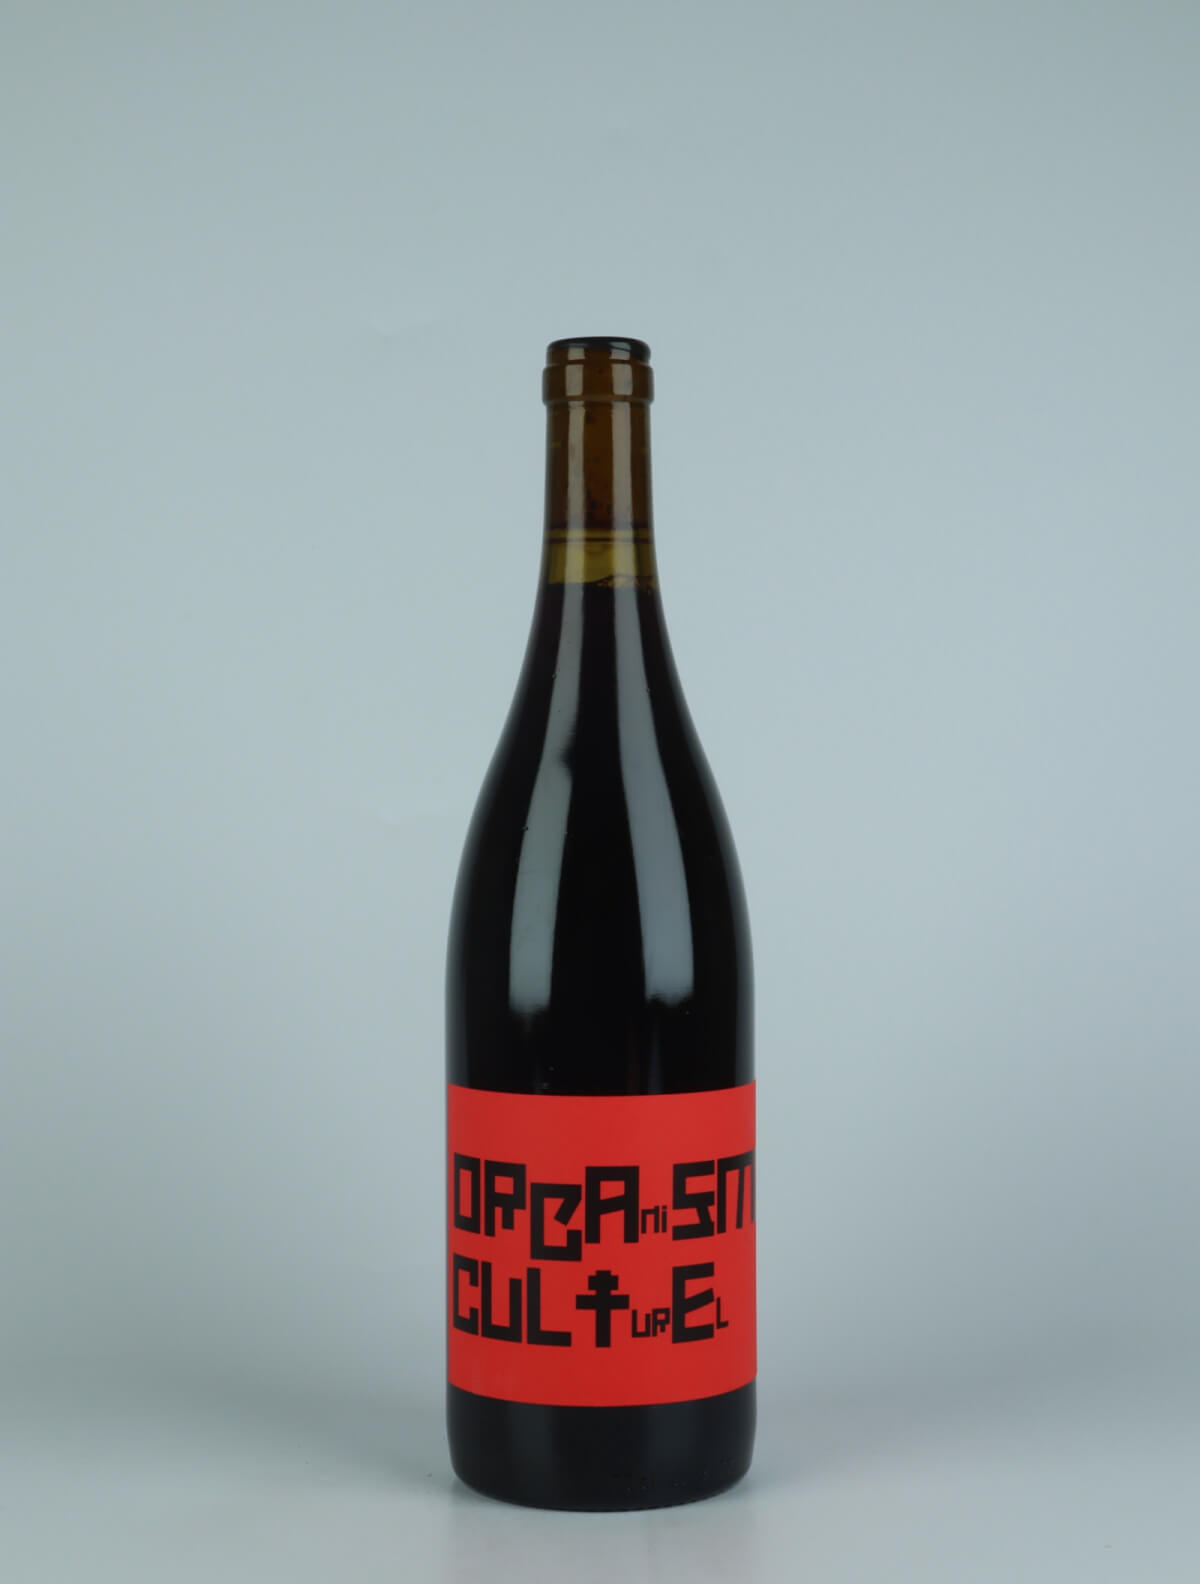 A bottle 2021 Bourgogne Rouge Côte Chalonnaise - Organisme Culturel Red wine from Benoit Delorme, Burgundy in France